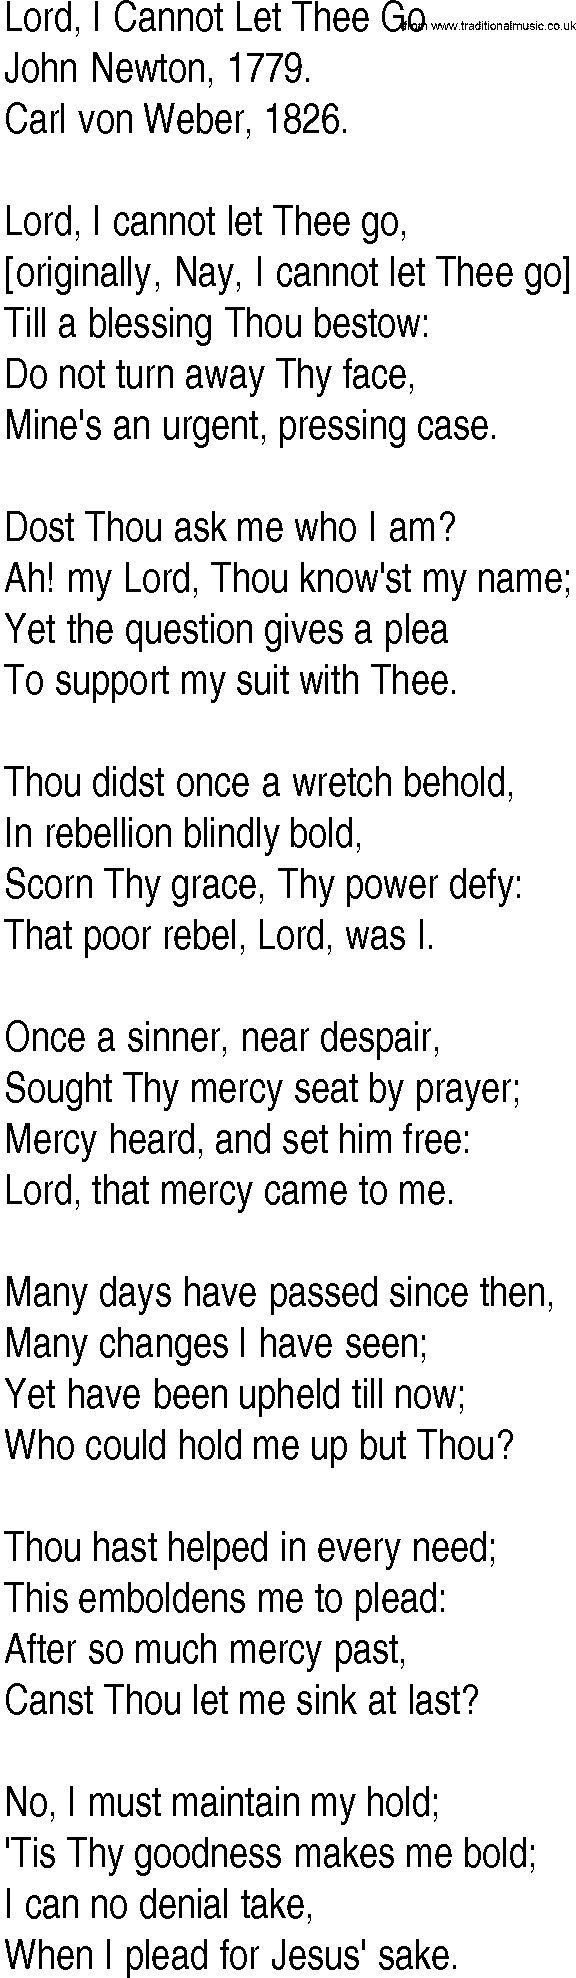 Hymn and Gospel Song: Lord, I Cannot Let Thee Go by John Newton lyrics